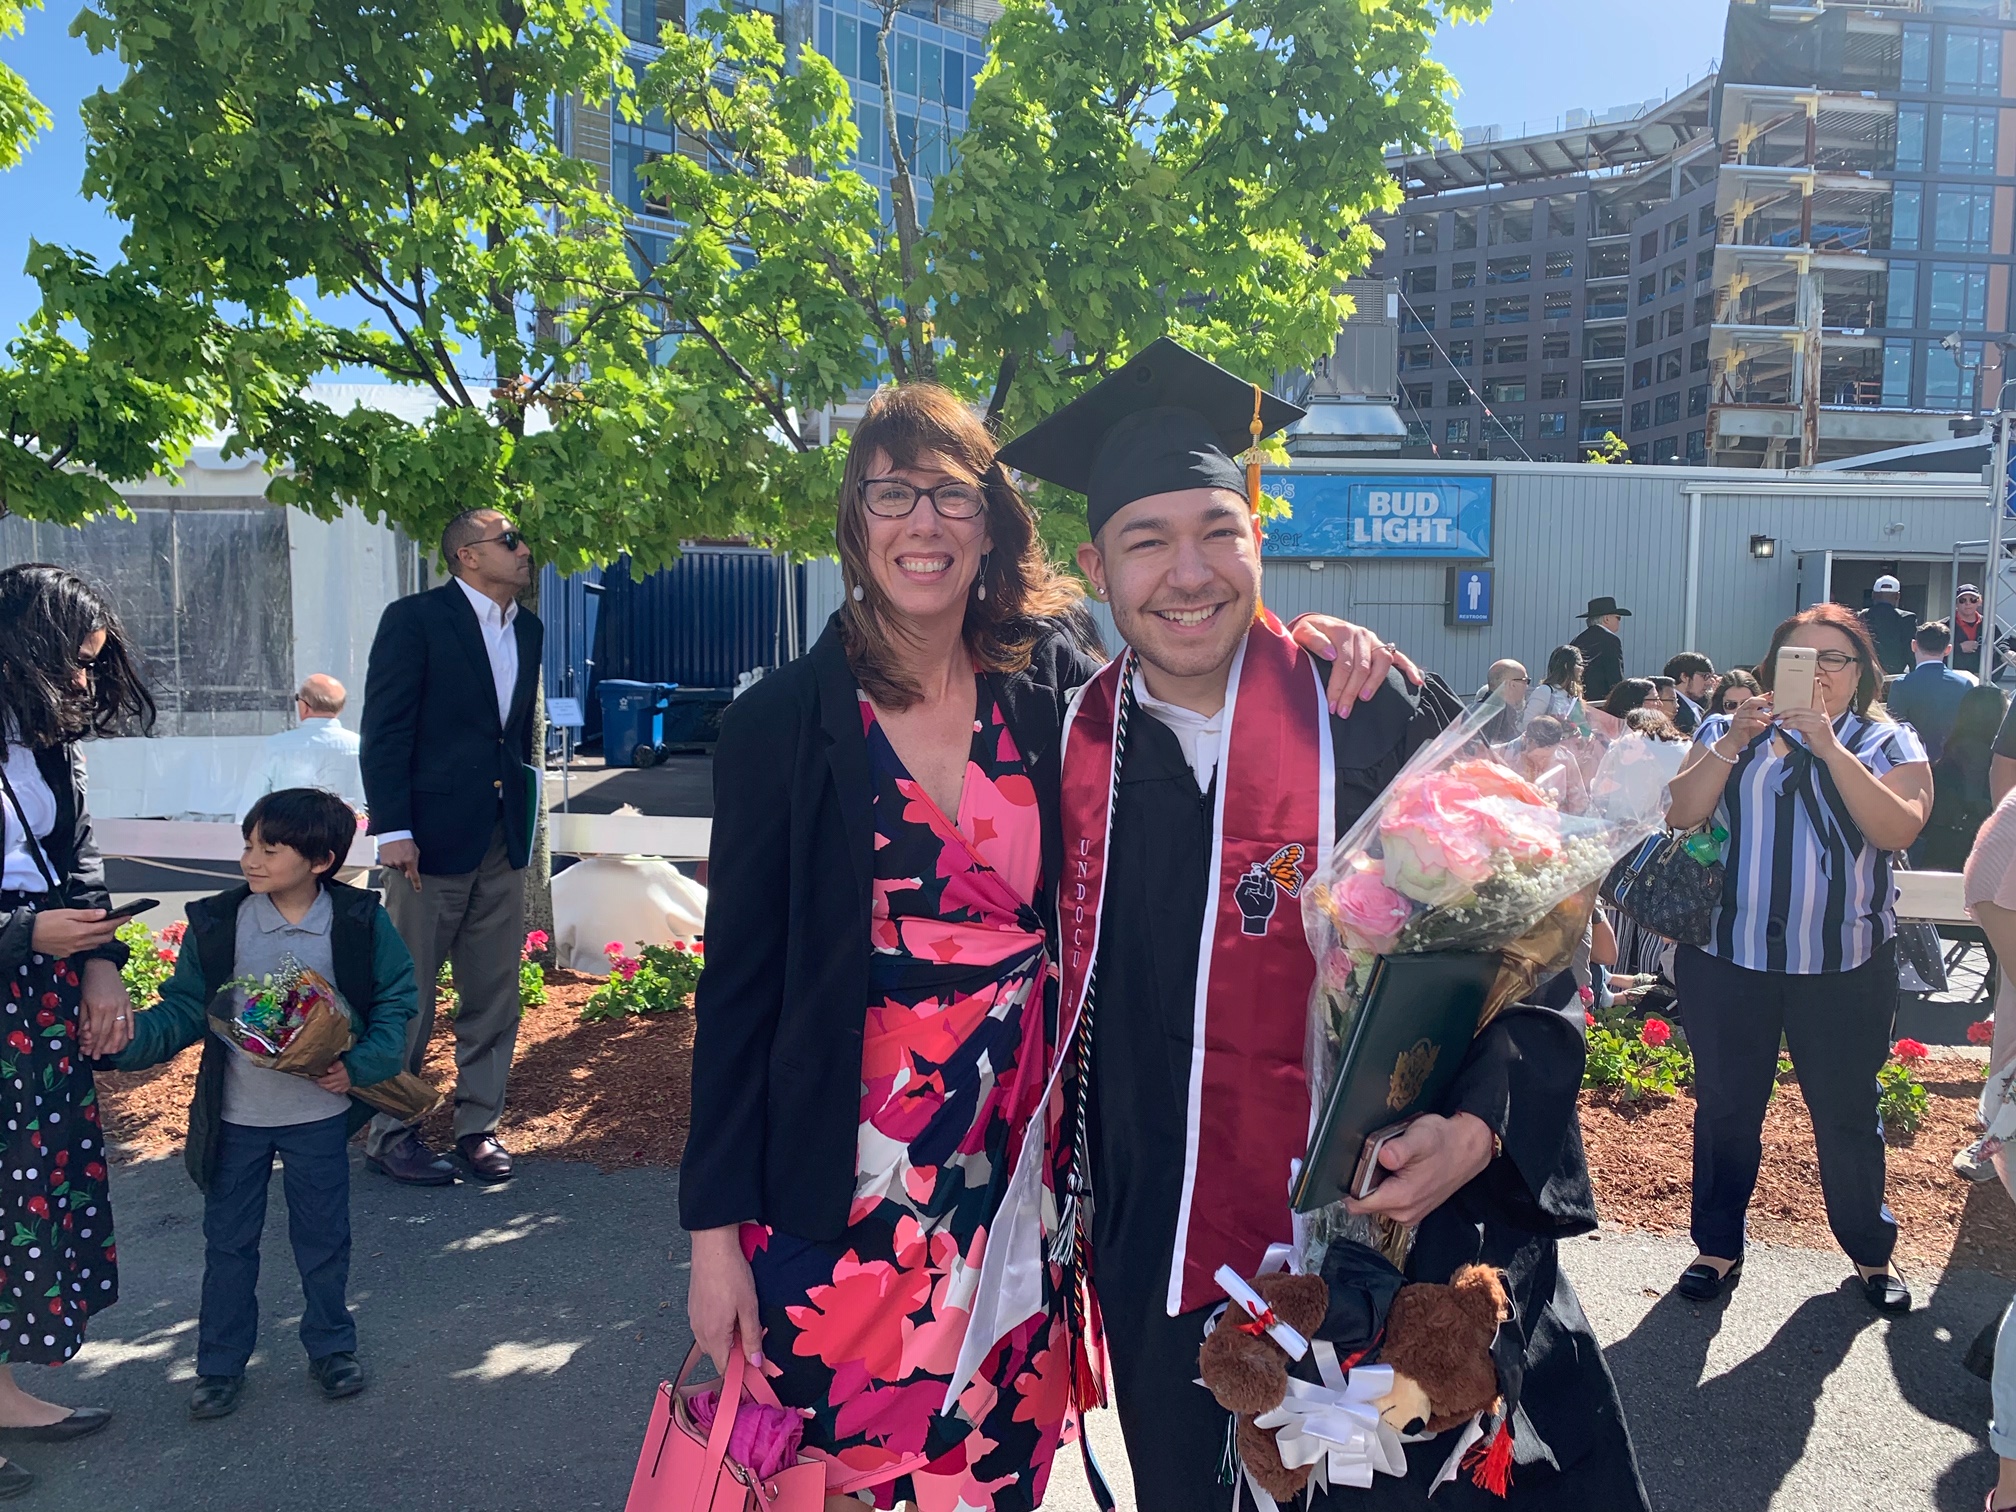 A woman and a young man in his graduation cap and gown posing for a photo on Lesley graduation day 2019.